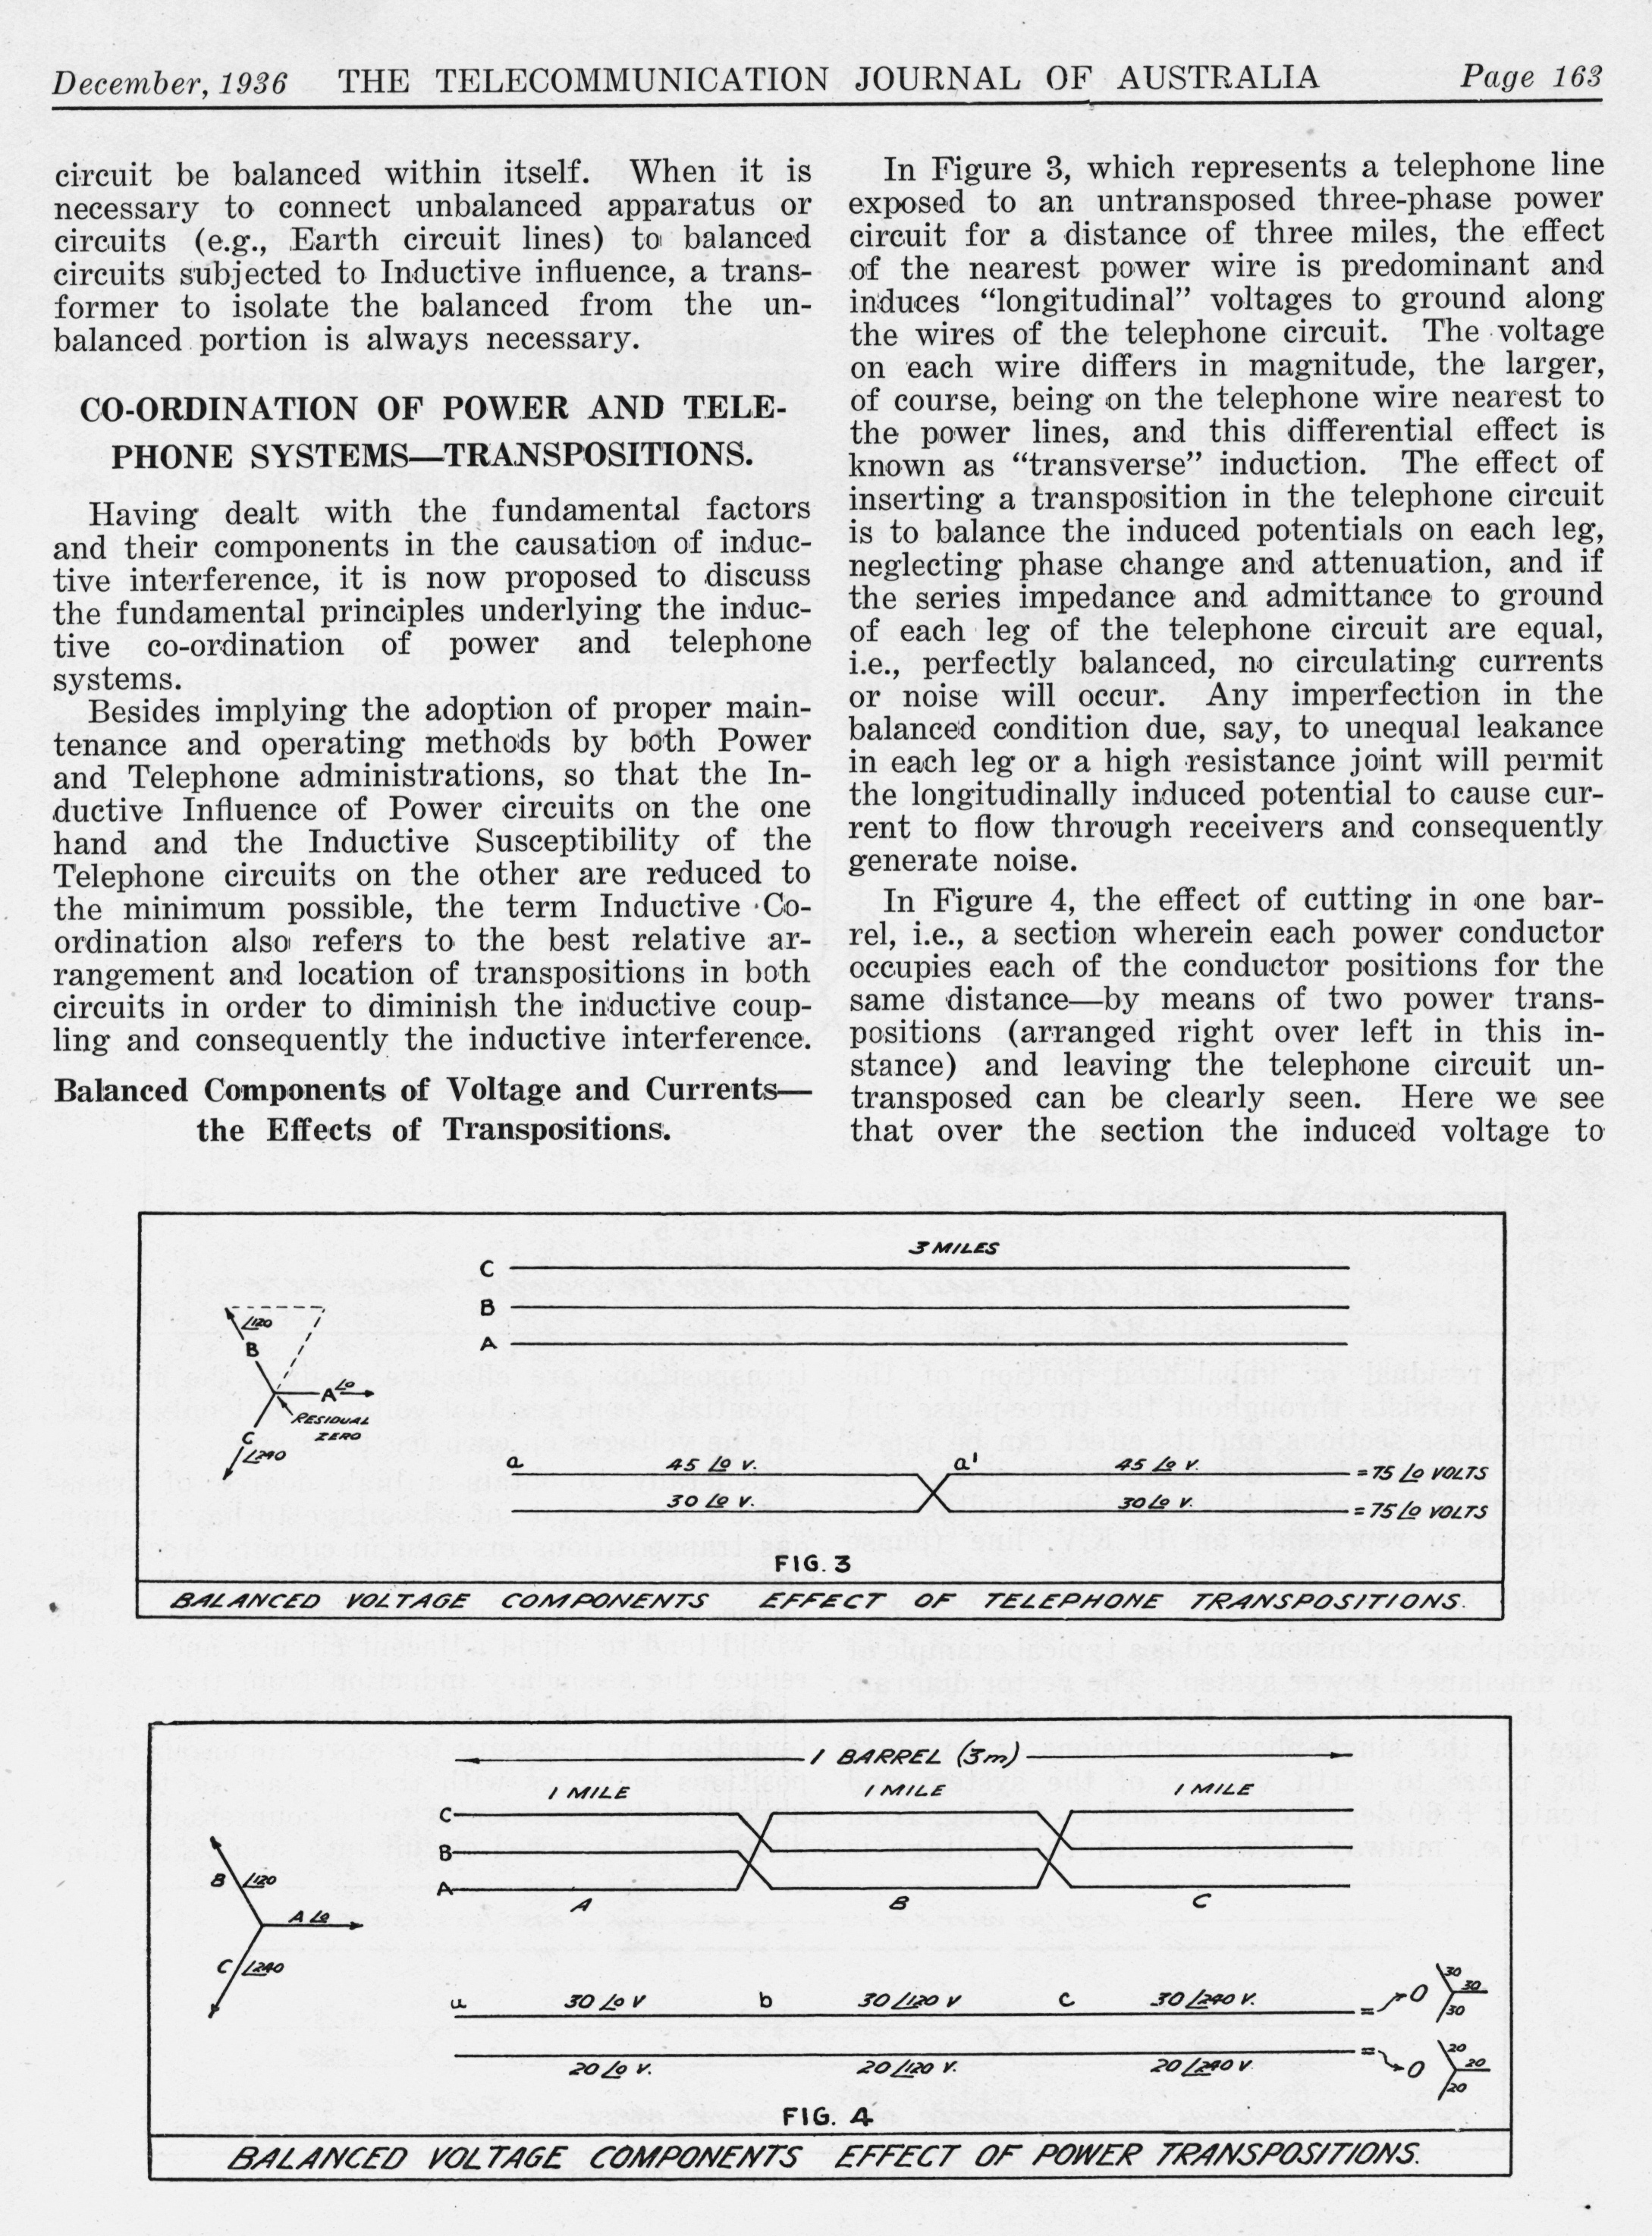 Page four of historical paper